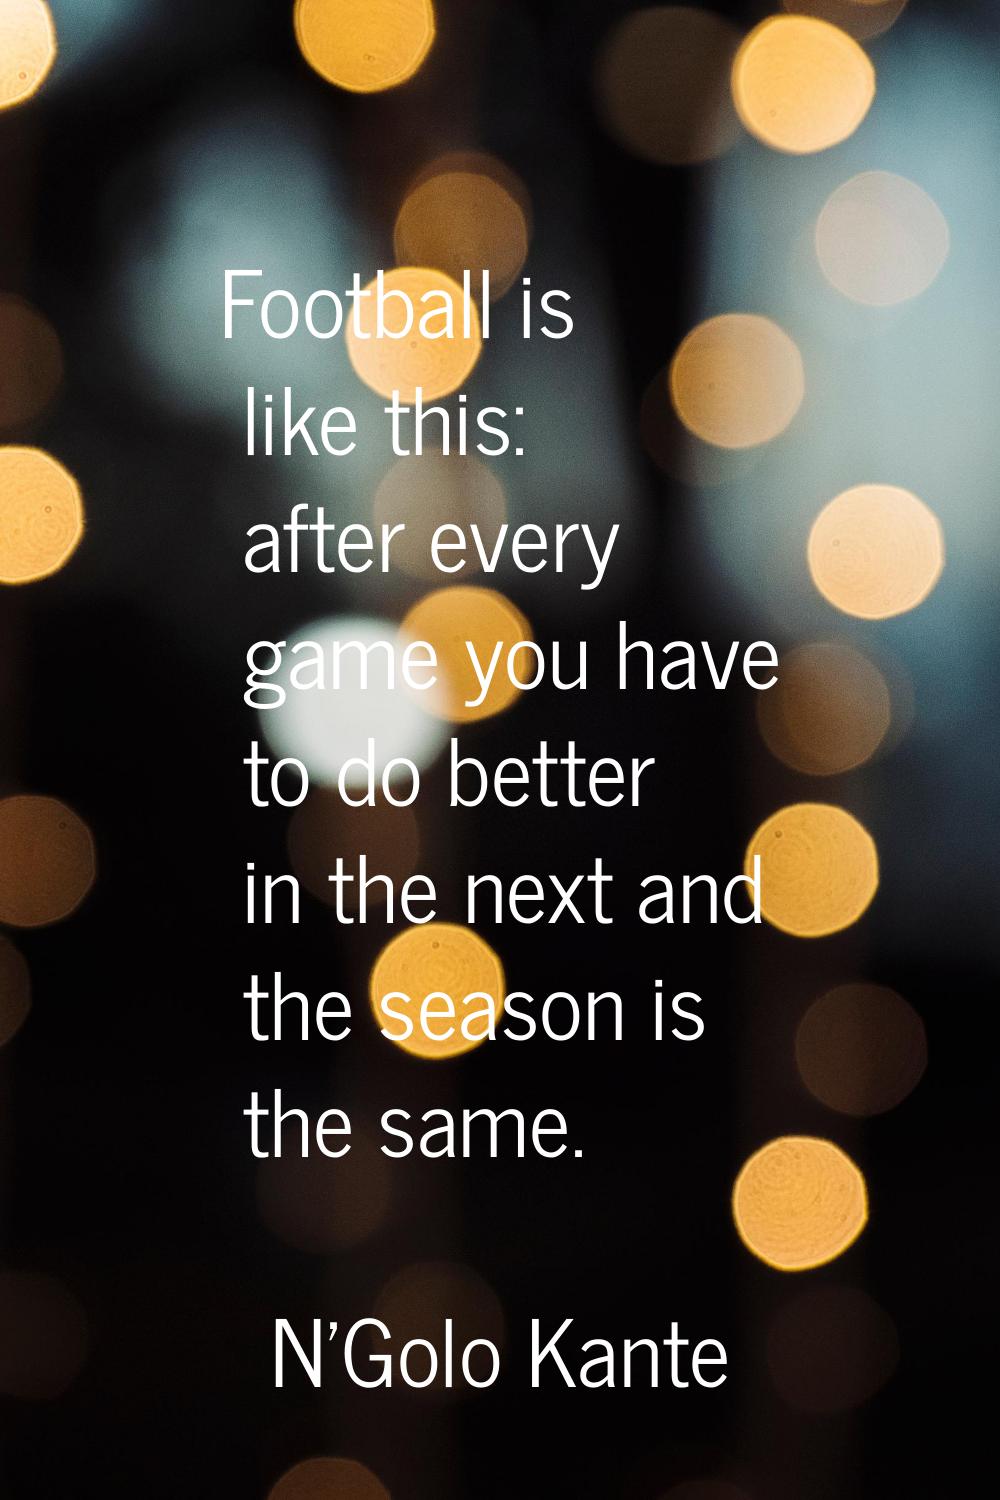 Football is like this: after every game you have to do better in the next and the season is the sam